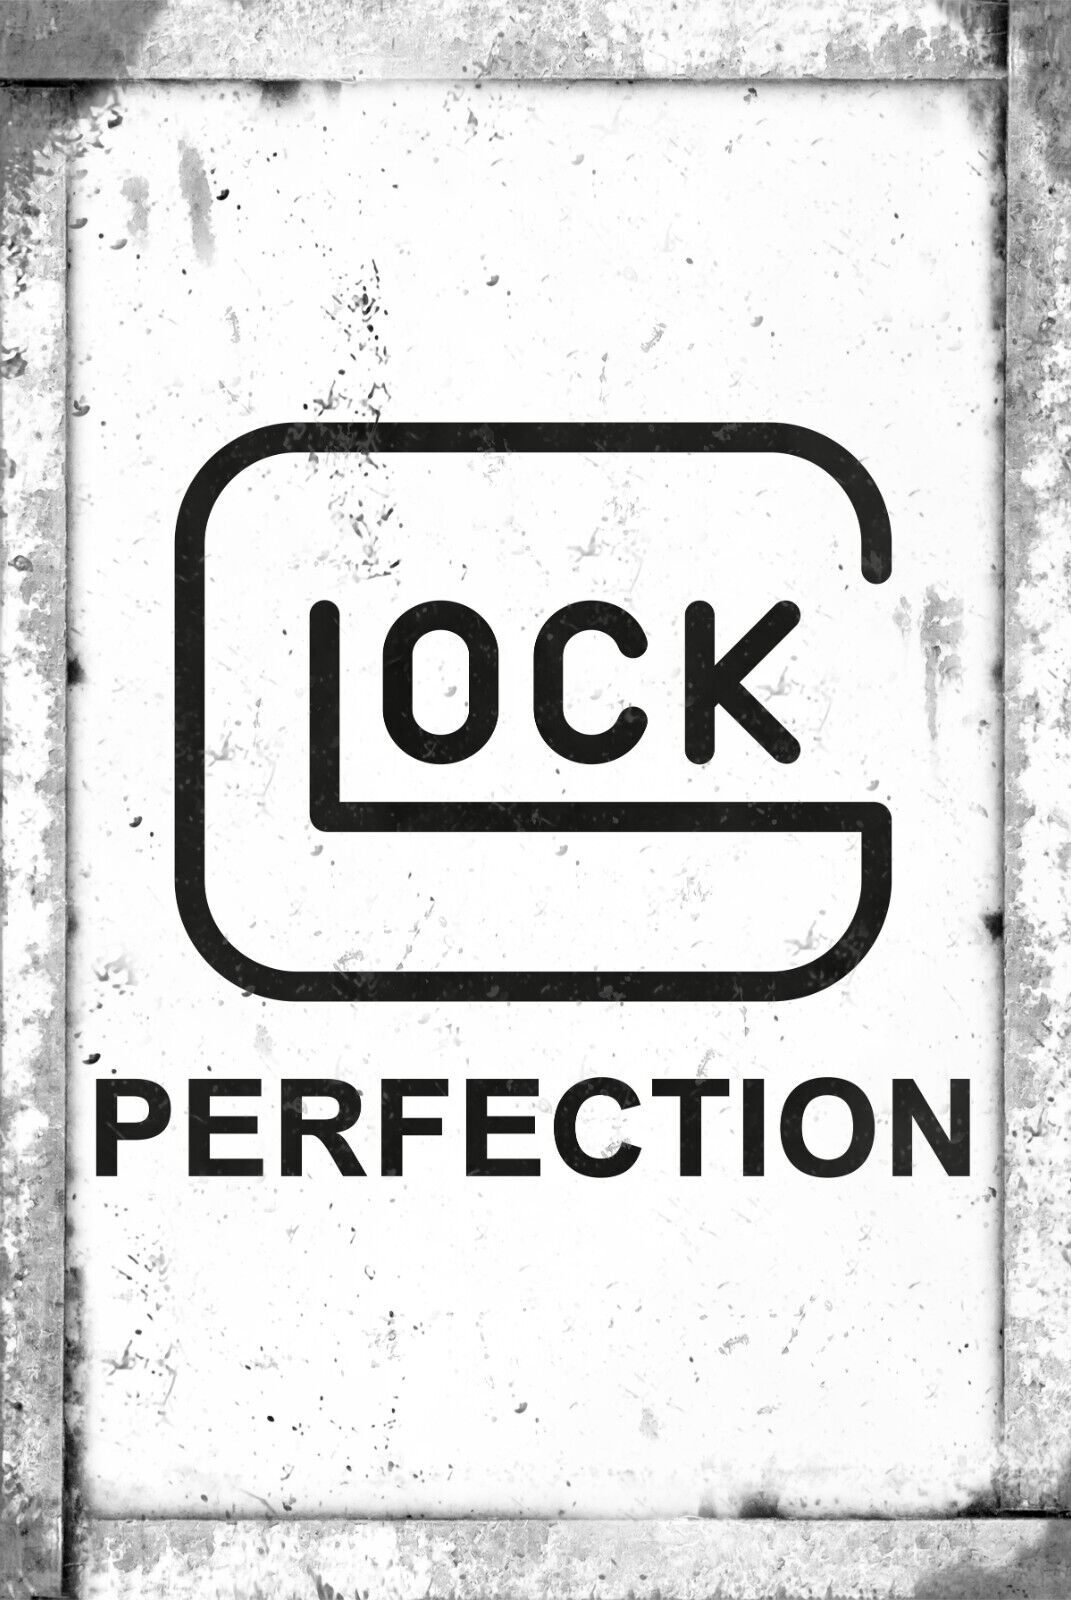 Glock Protection Firearms 8x12 Rustic Vintage Style Tin Sign Metal Poster